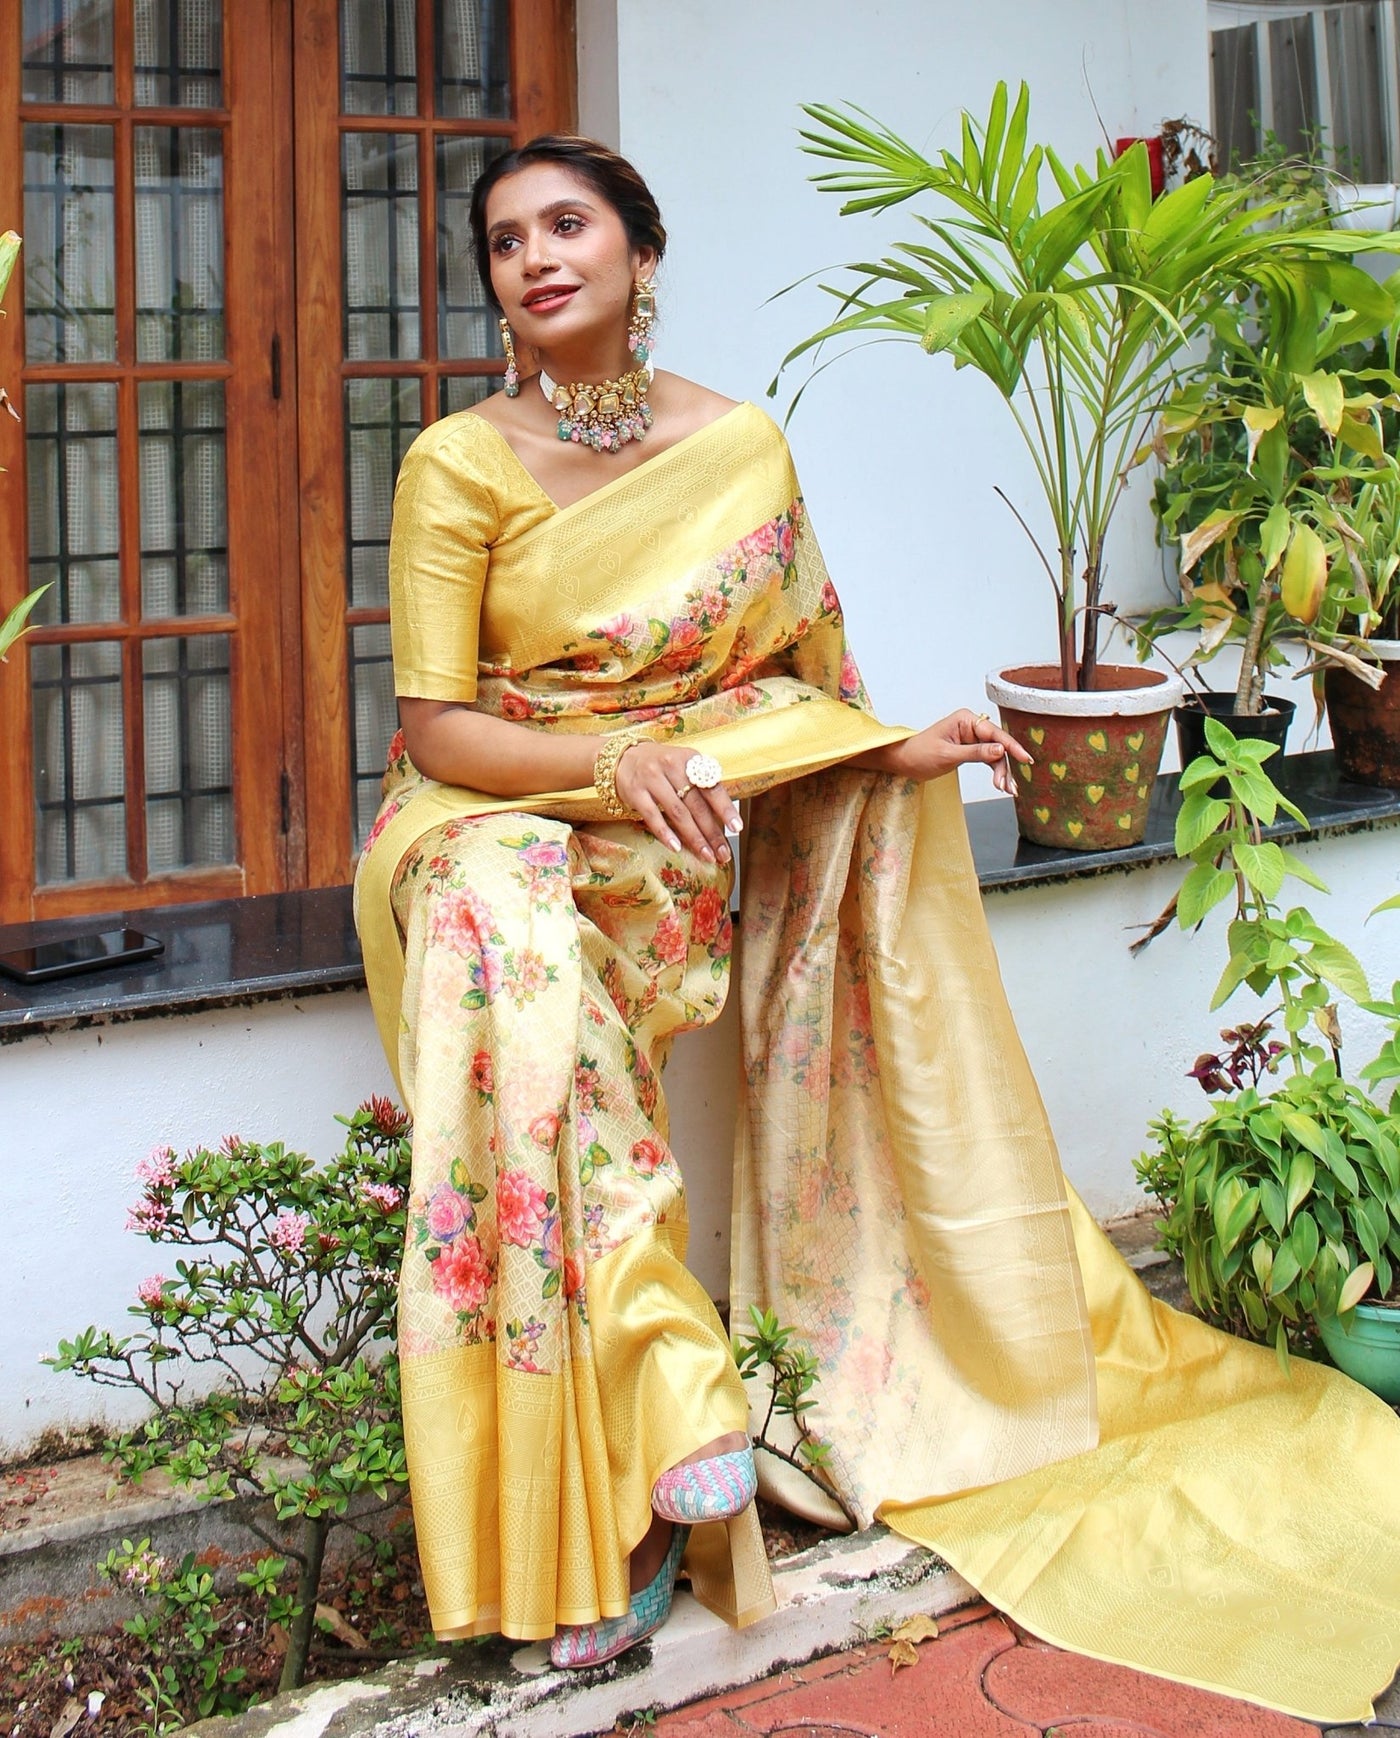 Digitally Printed Kuber Pattu Silk Saree, Exuding Regal Charm With Its Rich Pallu And Intricate Brocade Blouse, Elegantly Adorned With Enchanting Tassels On The Saree's Edge. - Almaari Fashion